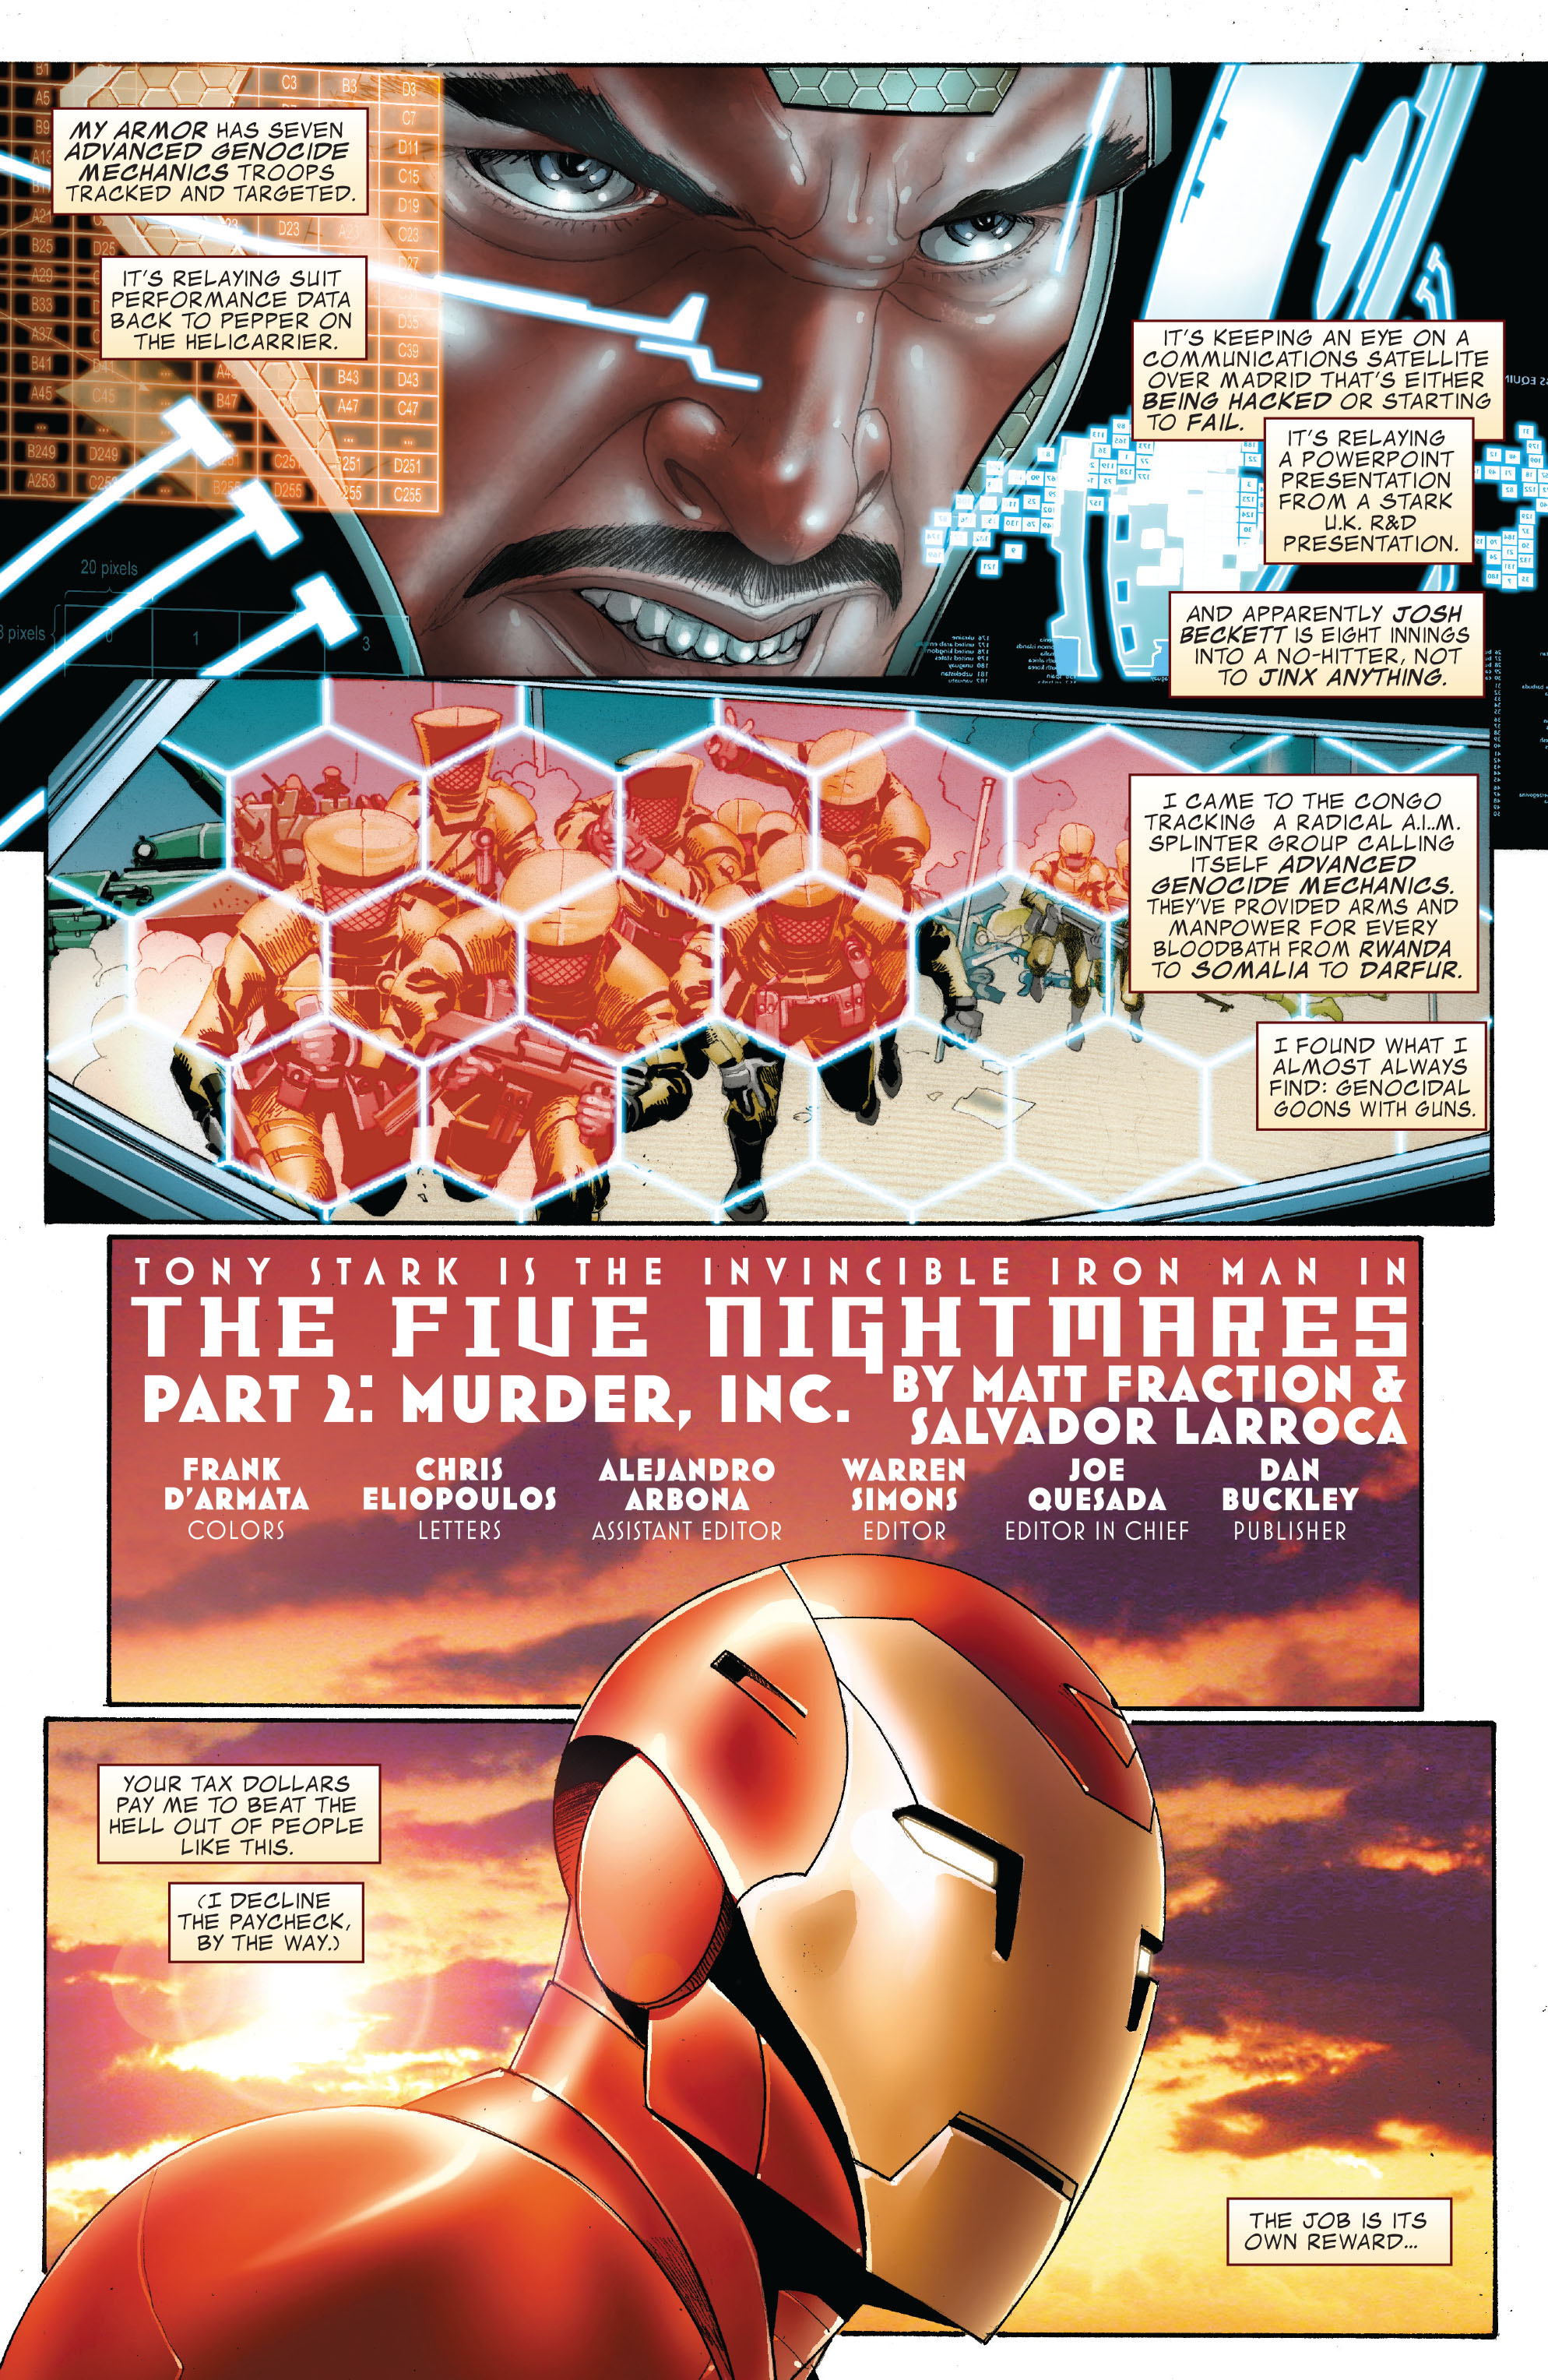 Invincible Iron Man (2008) 2 Page 1